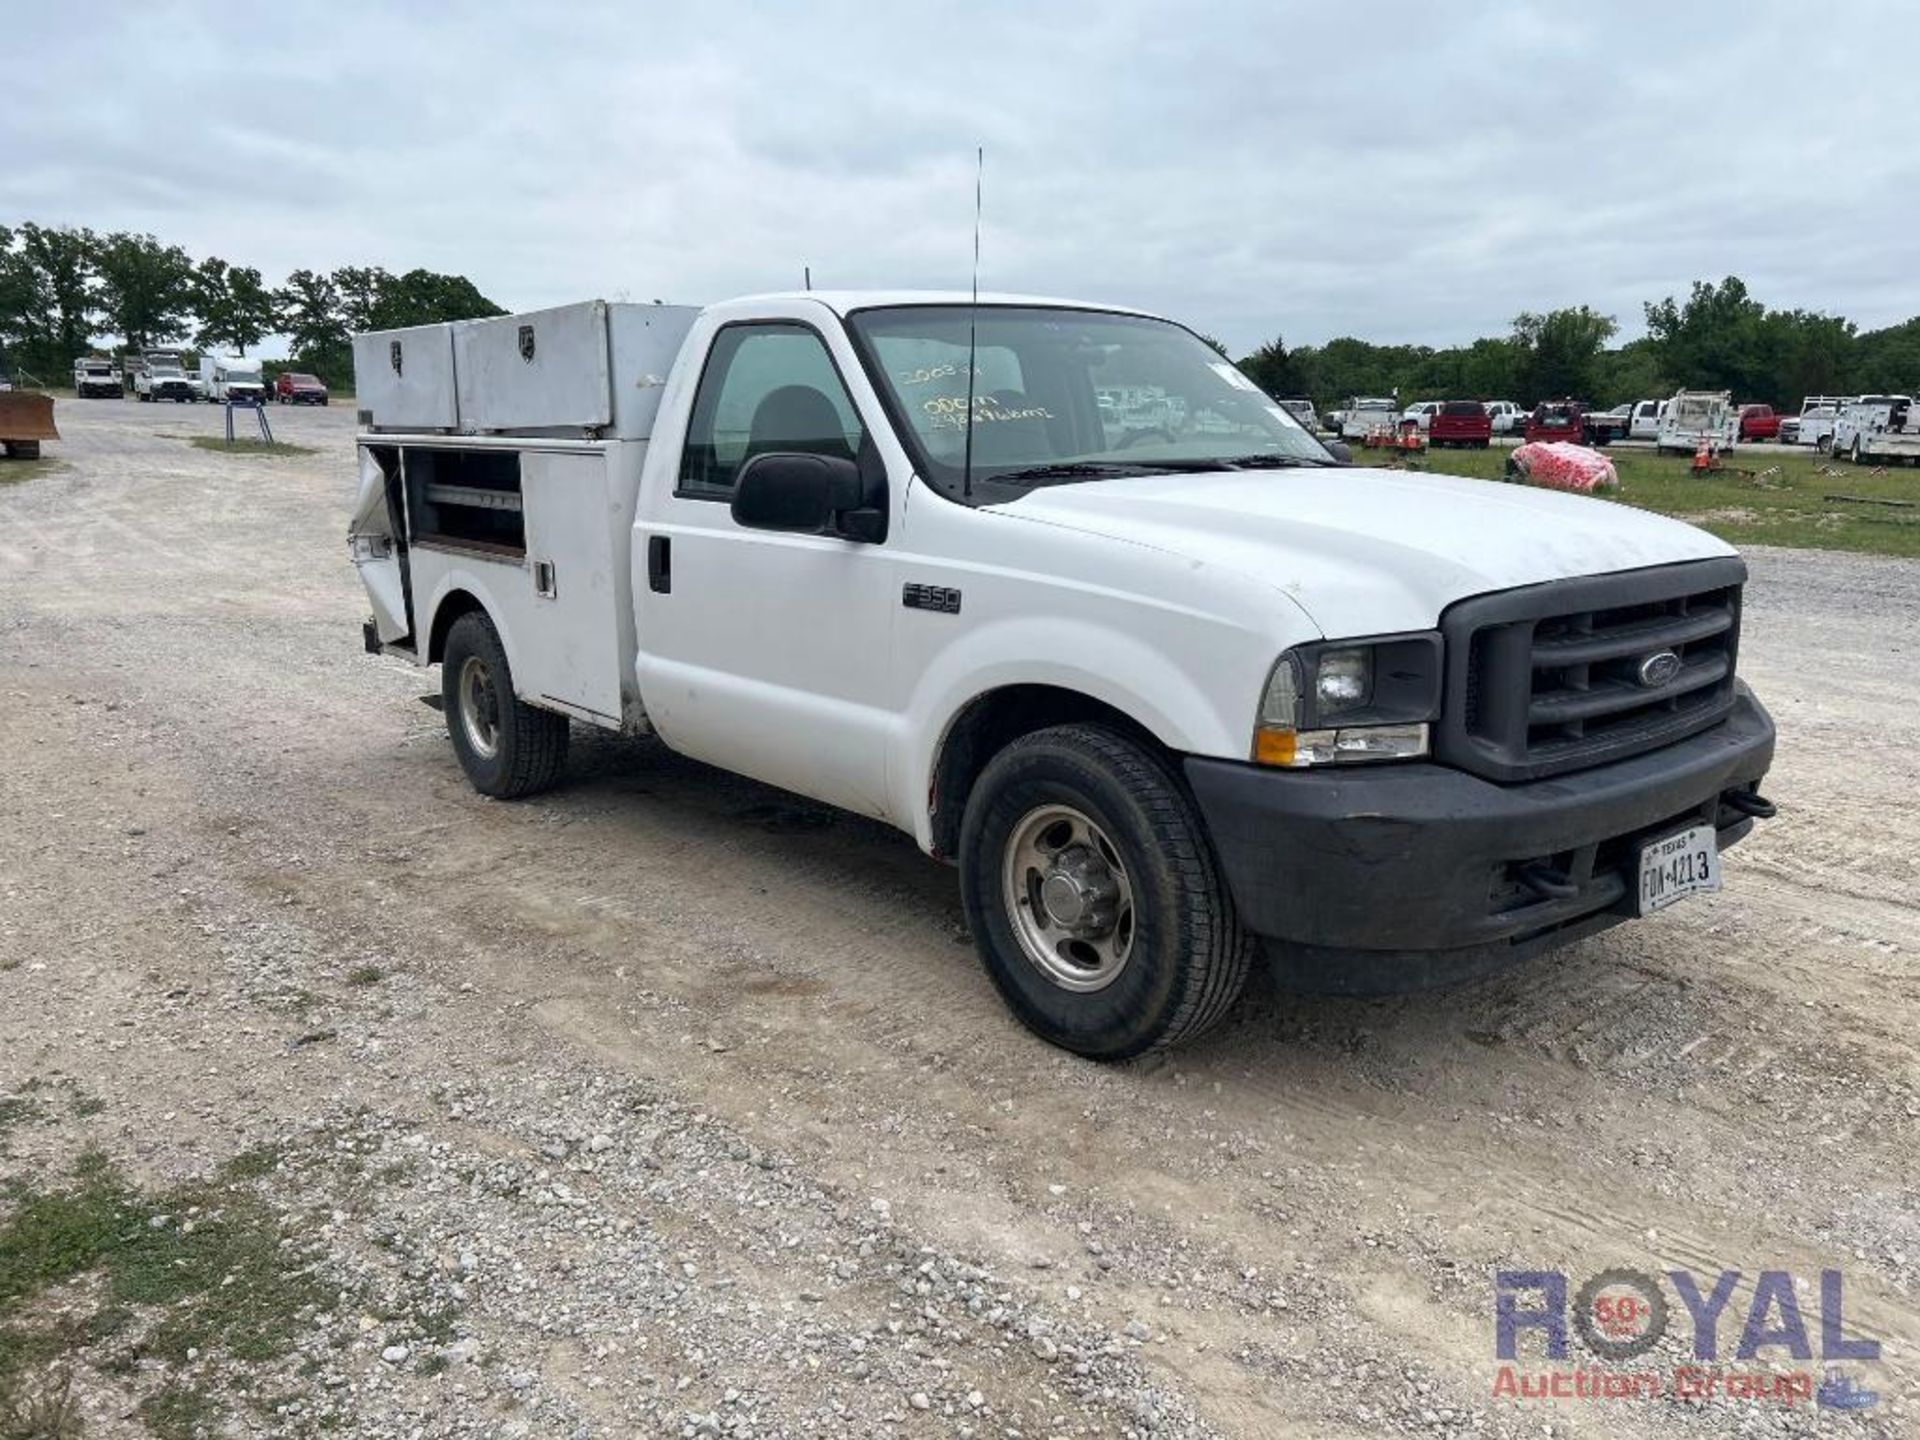 2003 Ford F350 Super Duty Service Truck - Image 2 of 29